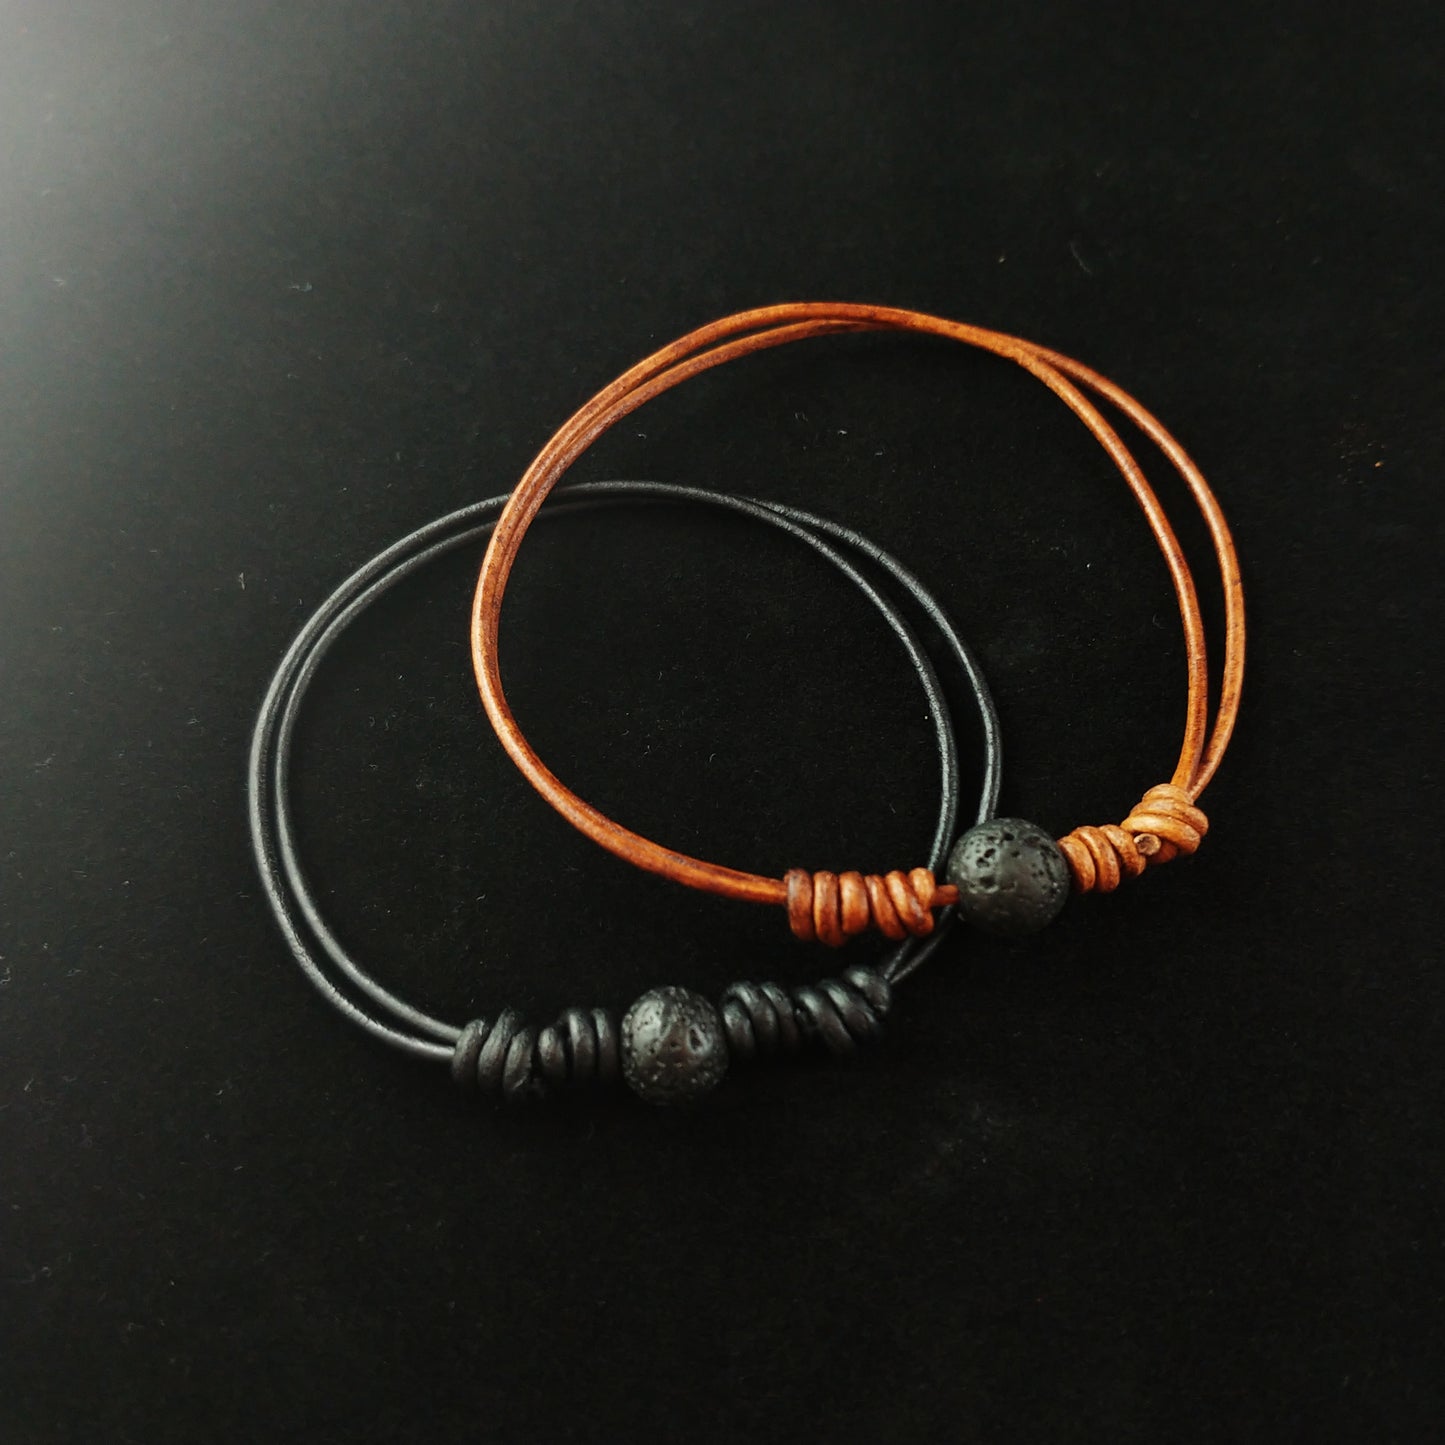 Thin leather bracelets sitting on a black display cloth. One bracelet has black leather and a center lava stone piece. The other bracelet has brown leather and a lava stone in the center.